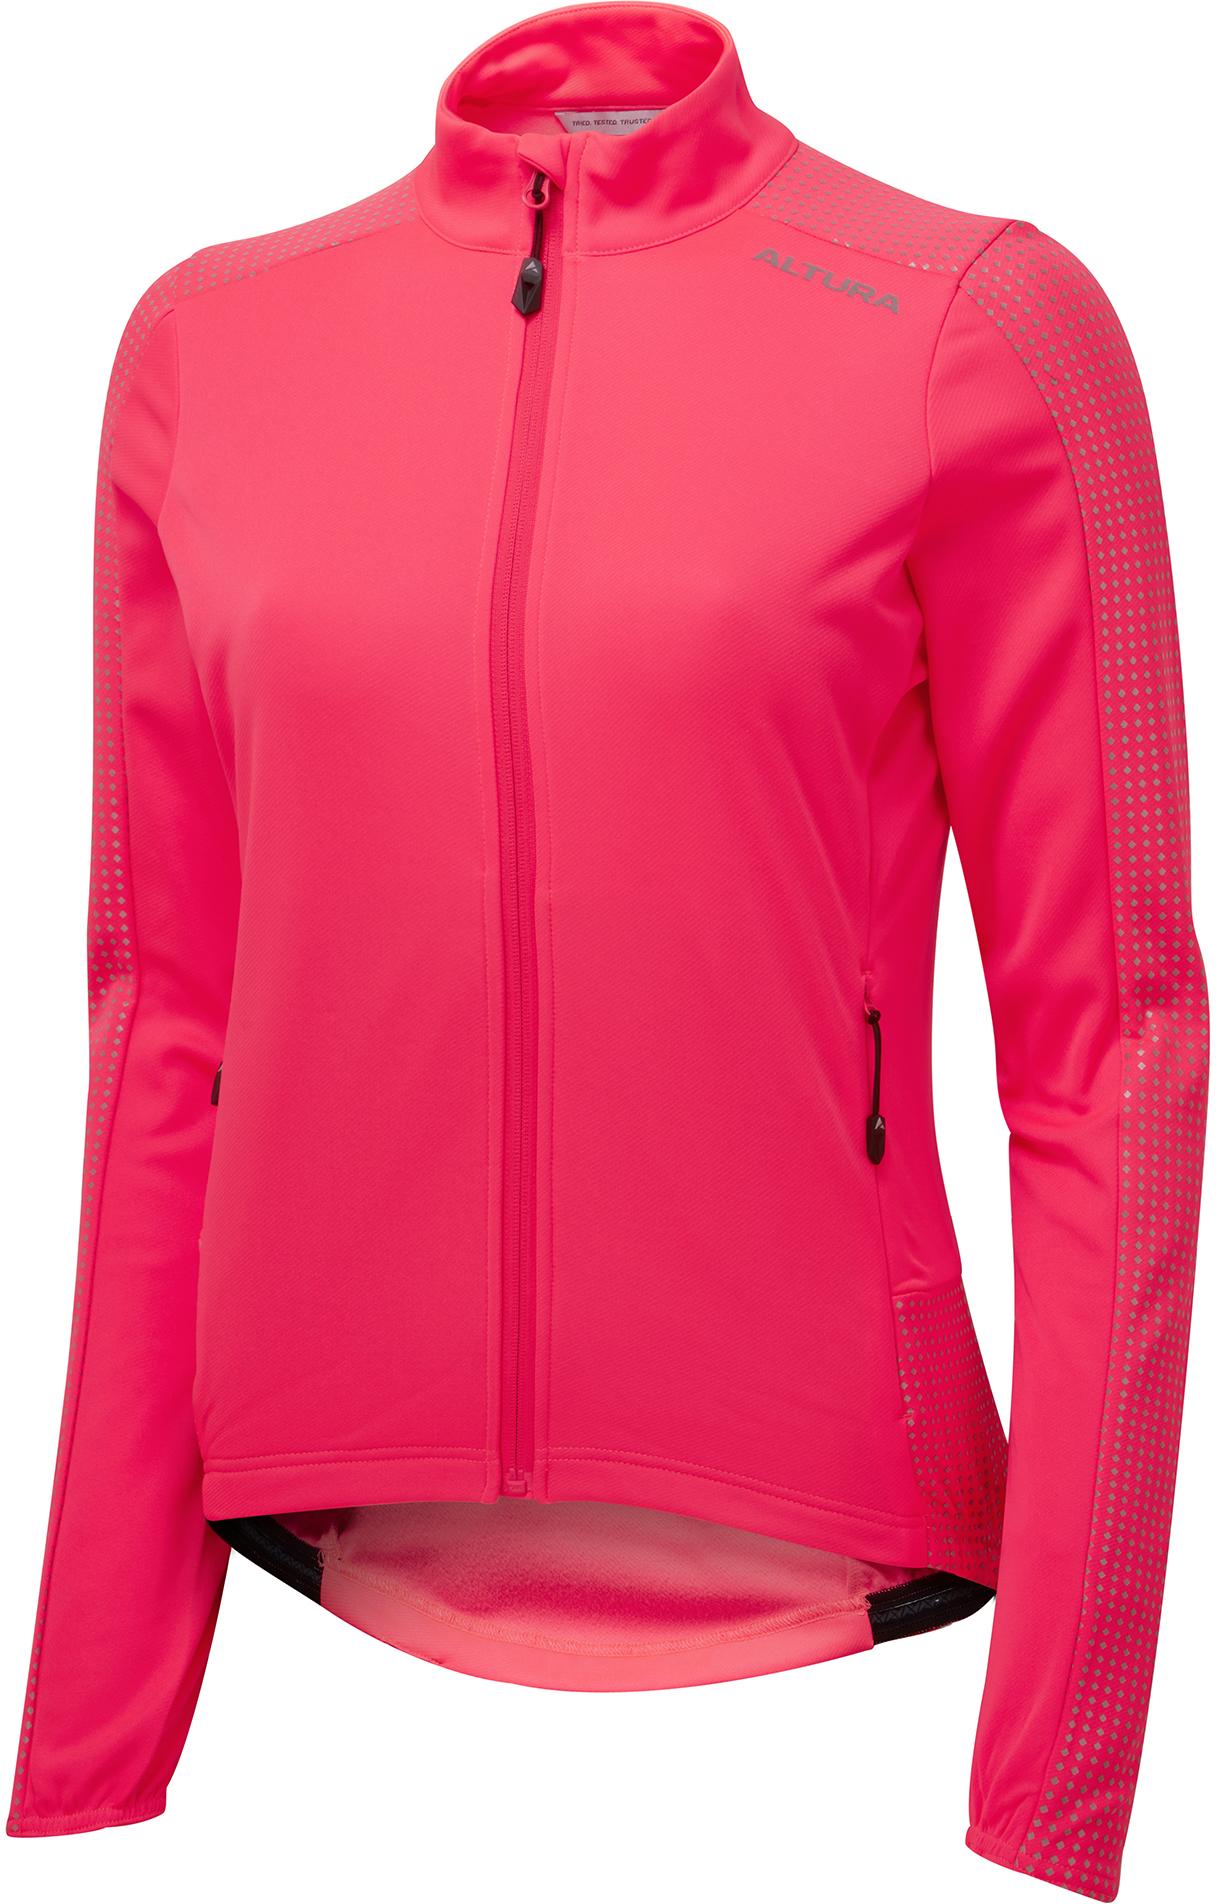 Altura Nightvision Women's Long Sleeve Jersey Pink 12